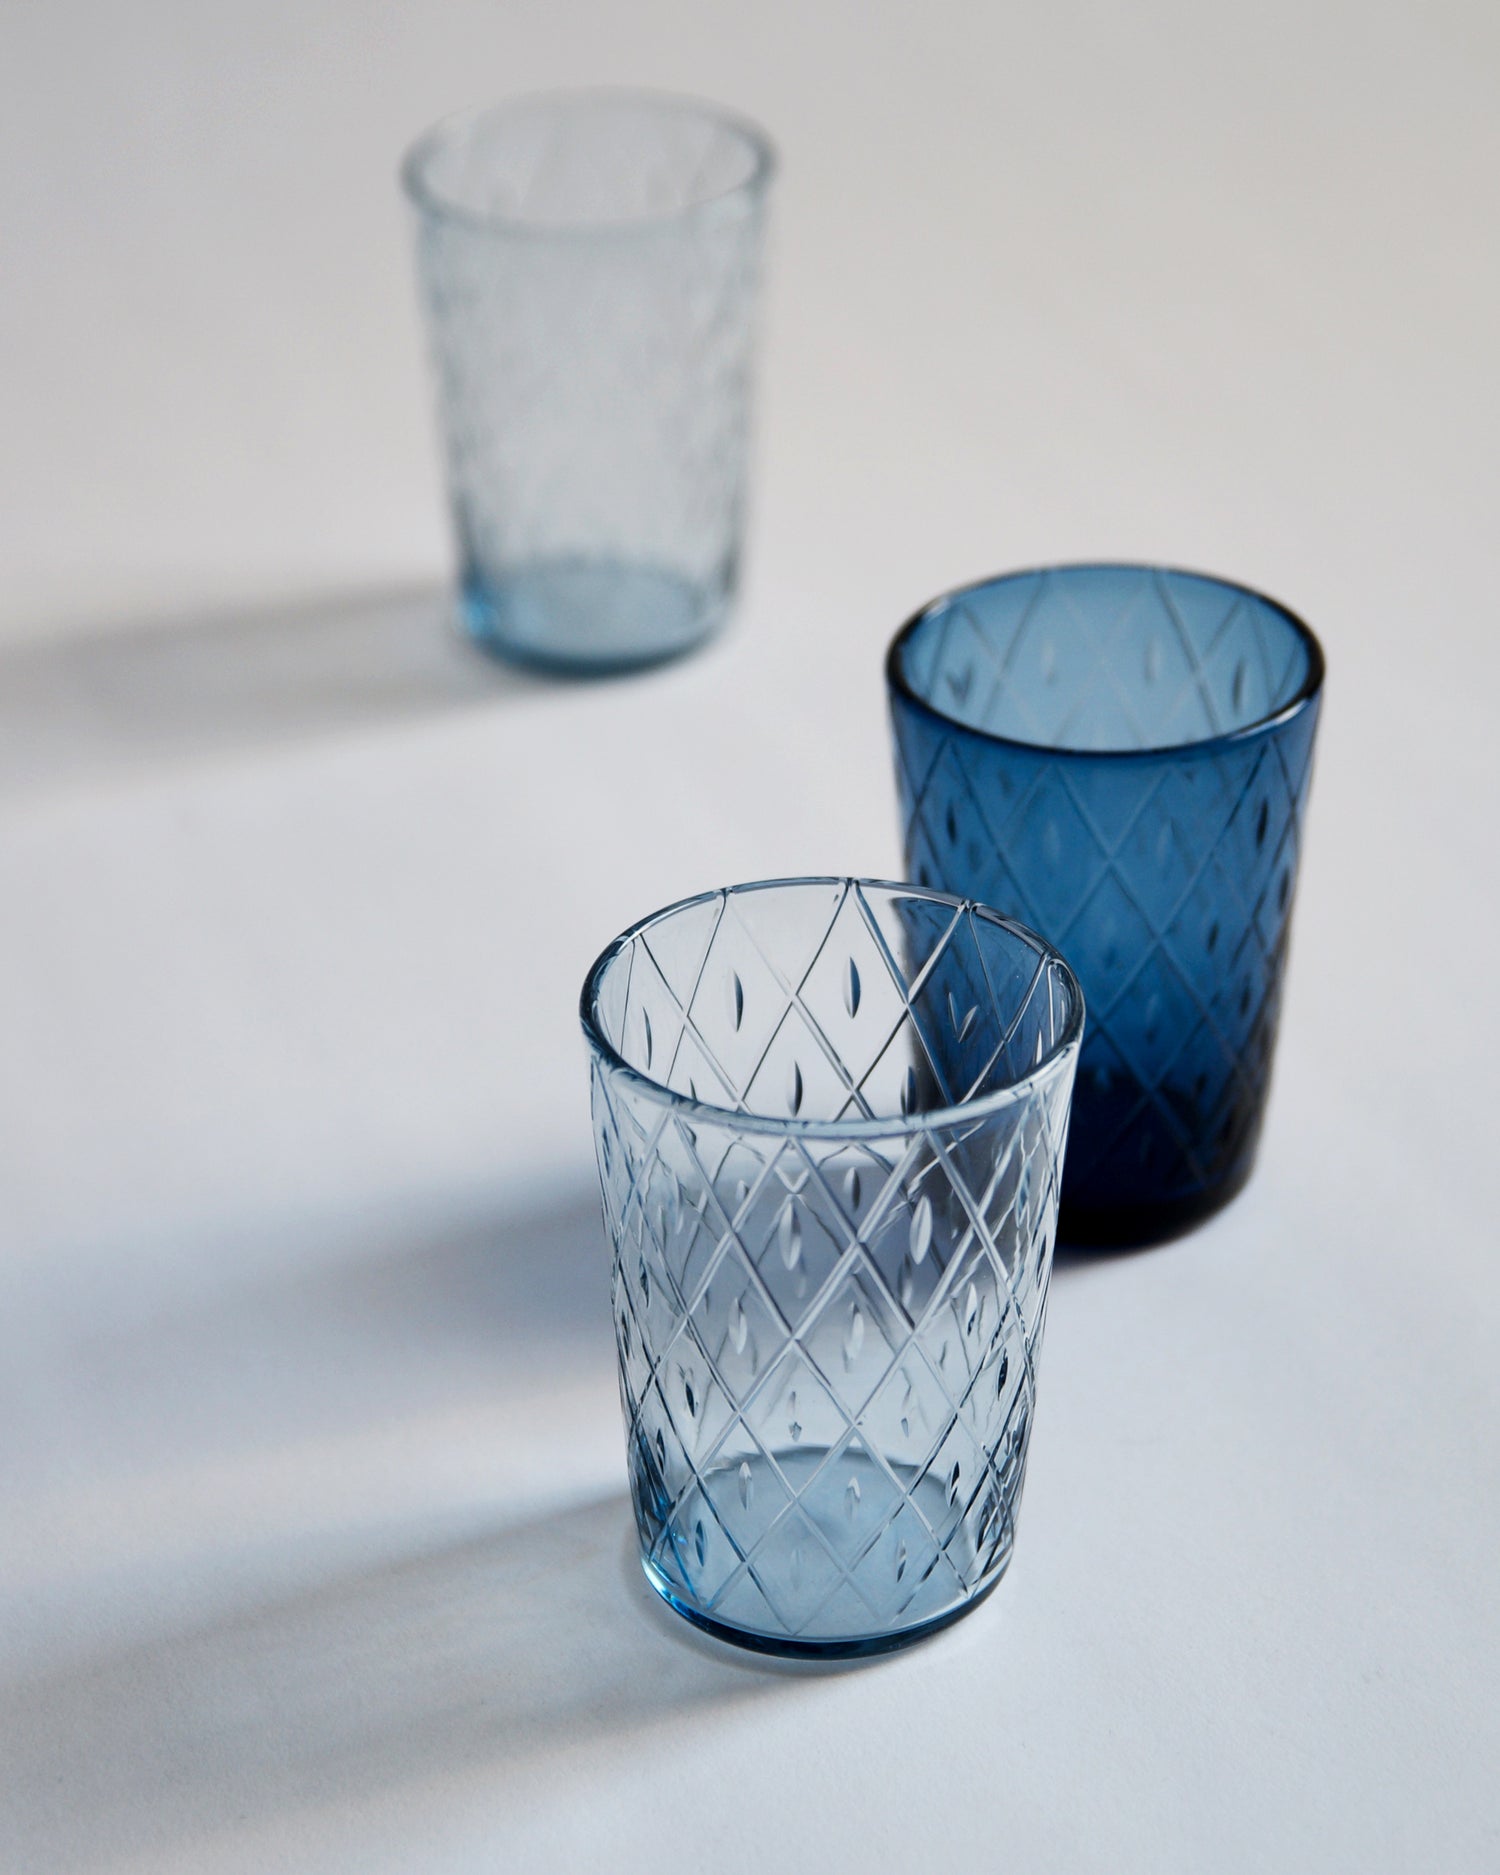 Three wire net ordinary cup in a diagonal row. Each cup is of a different shade of blue.